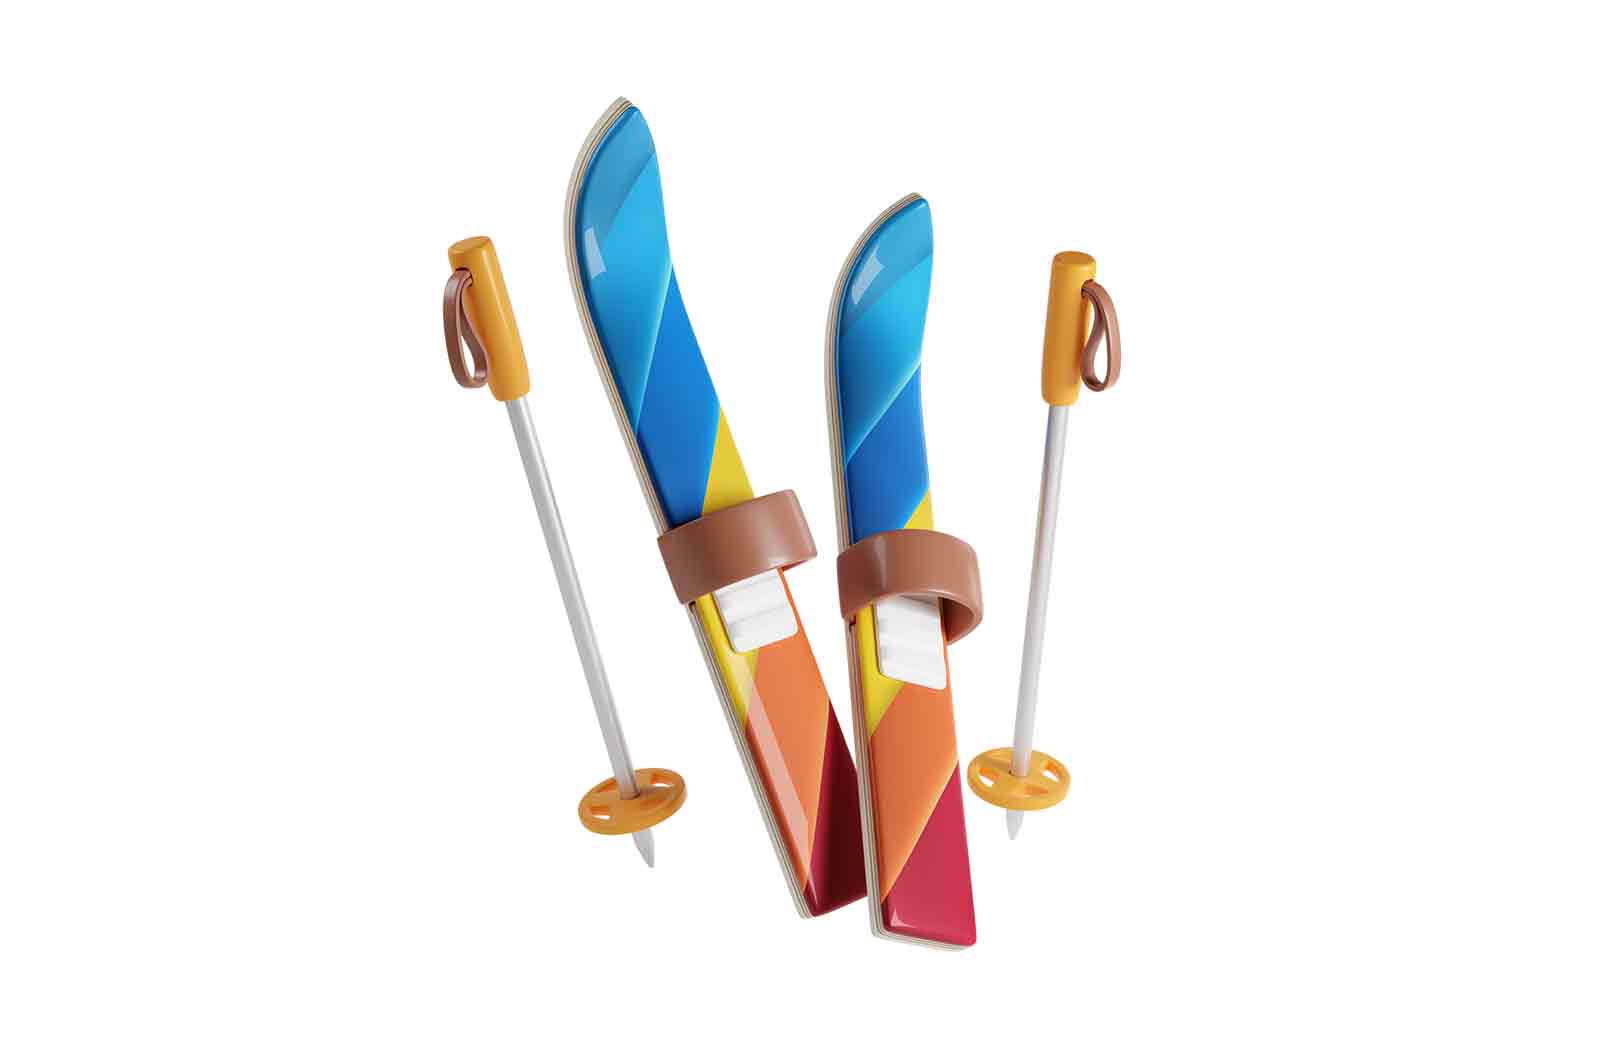 Mountain ski and sticks equipment 3d rendered illustration. Extreme skiing tools, skier gear. Winter sport activity concept